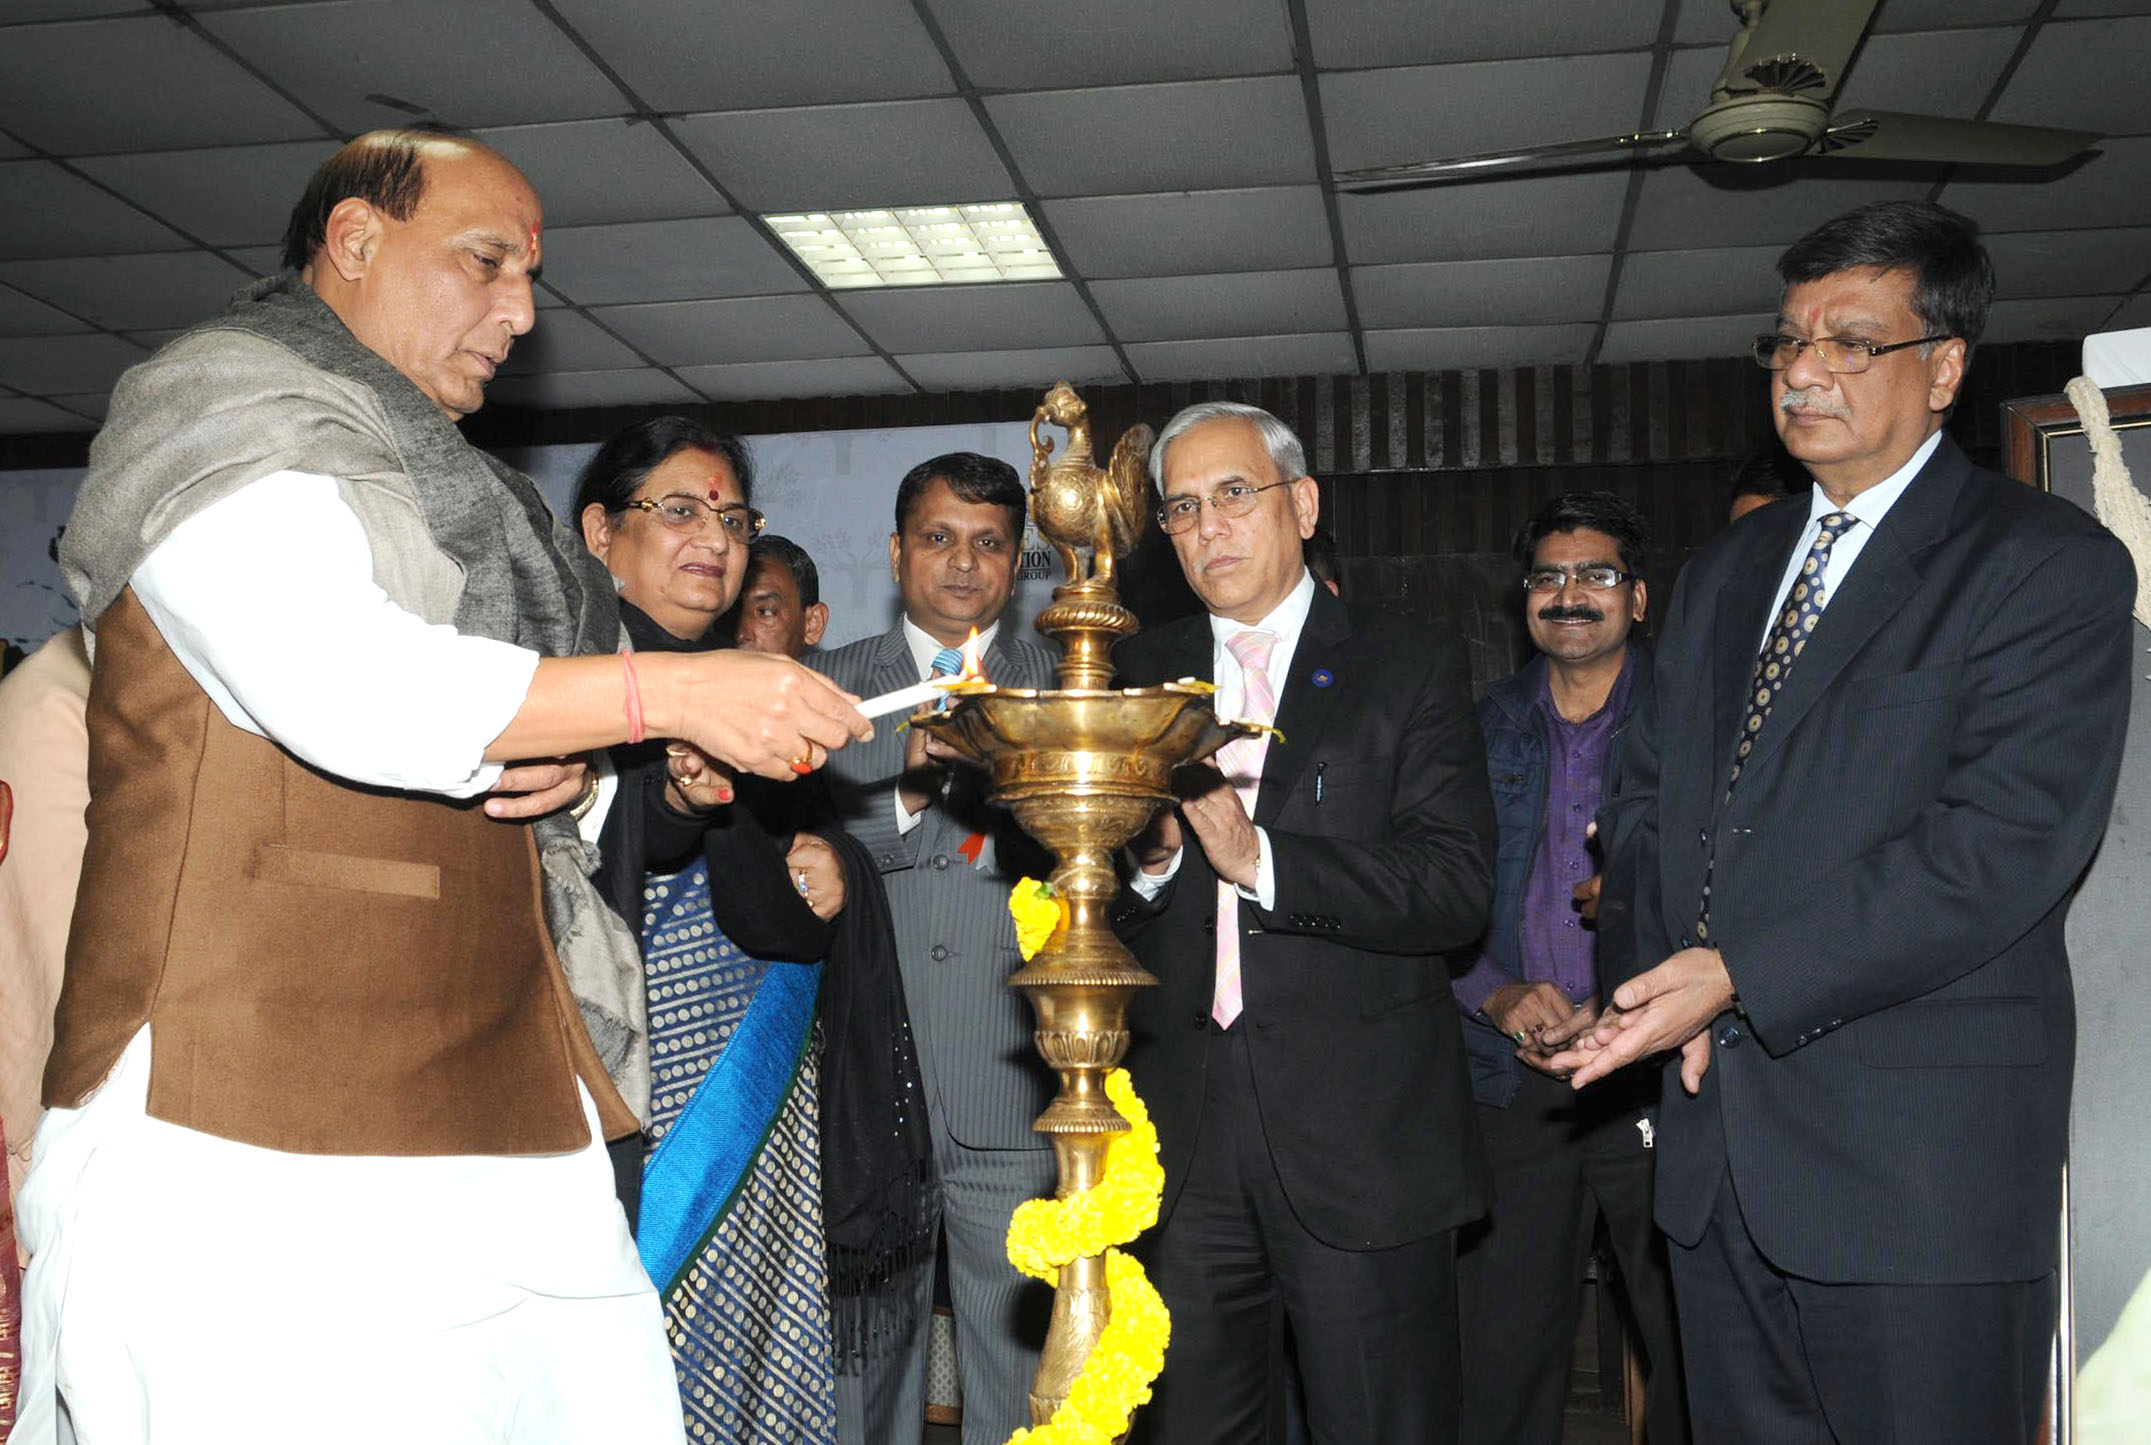 The Union Home Minister, Shri Rajnath Singh lighting the lamp to launch the project Empowering elderly through young generation, in New Delhi on January 17, 2016.